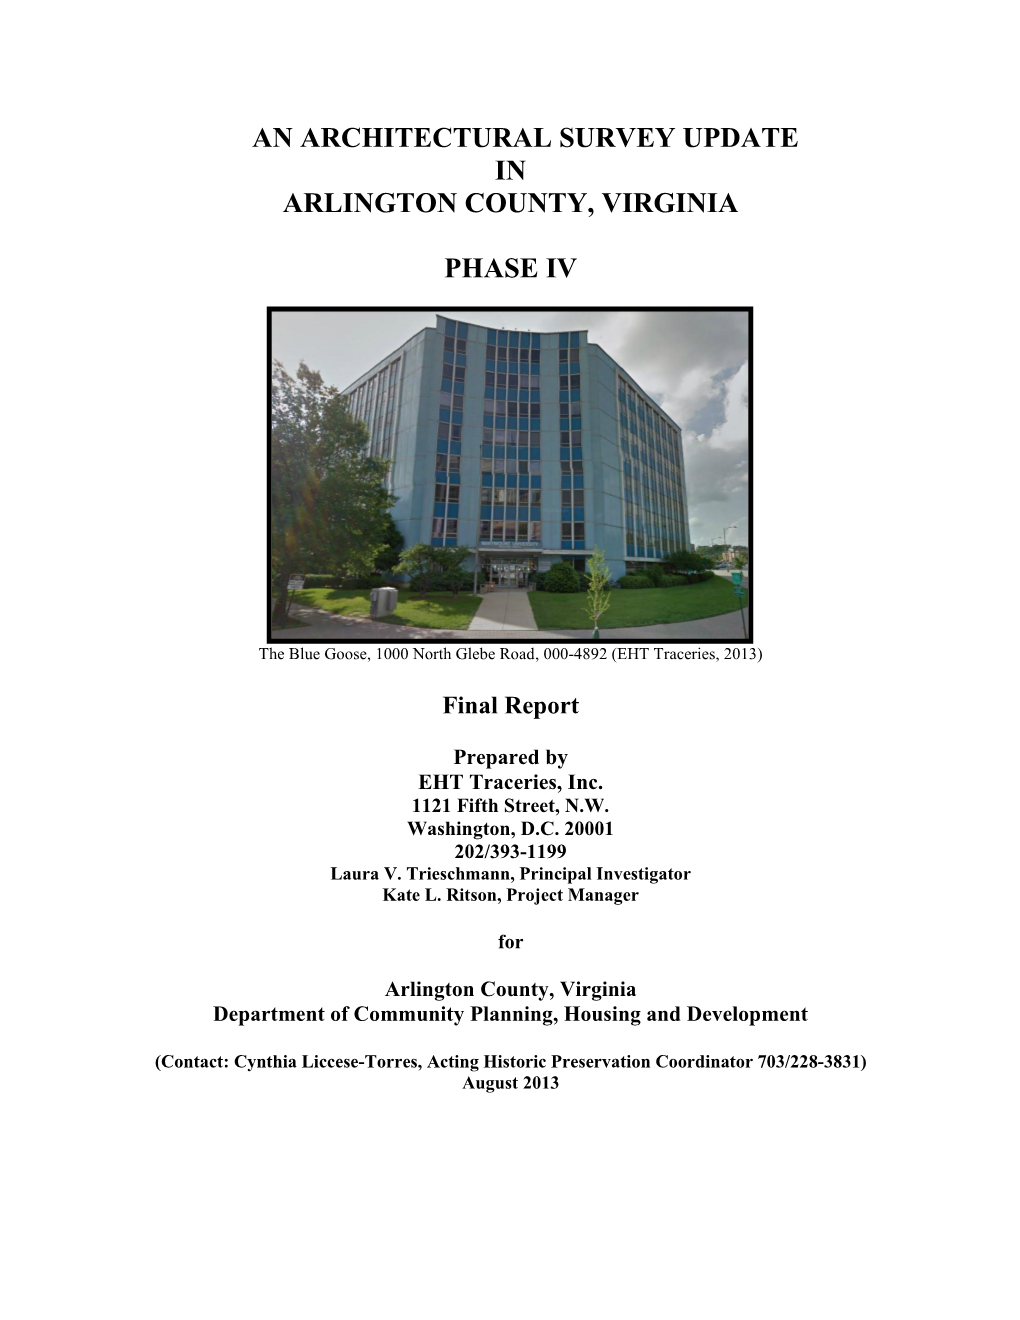 Architectural Survey Update of Arlington County